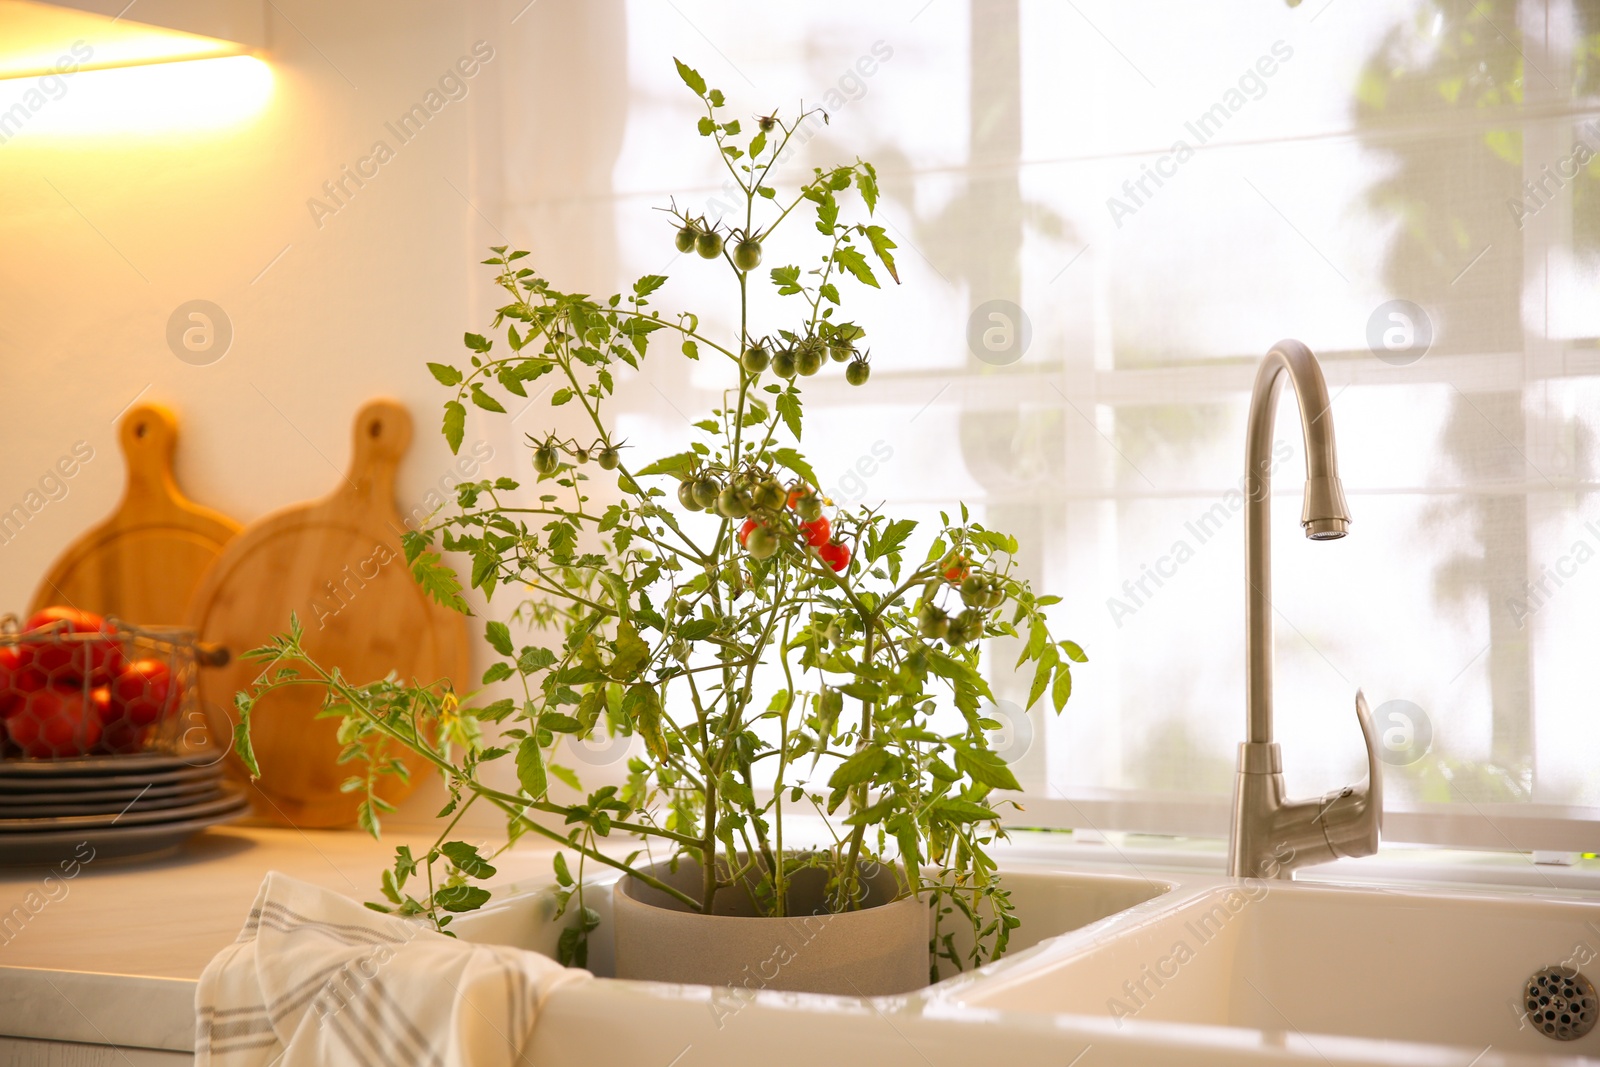 Photo of Potted tomato bush with ripening fruits in kitchen sink